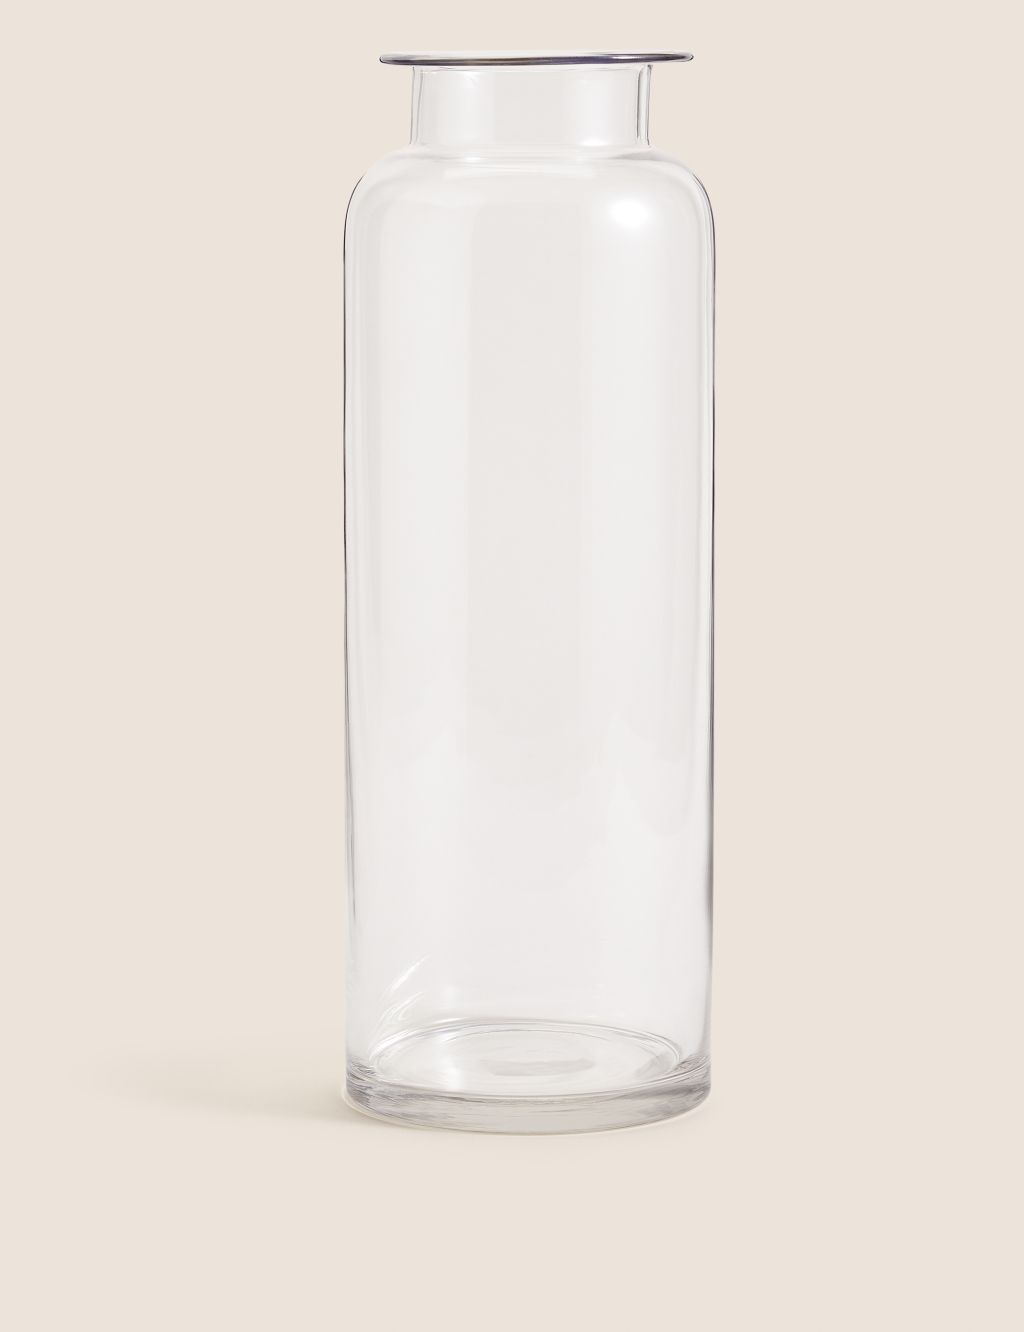 Tall Apothecary Vase image 1